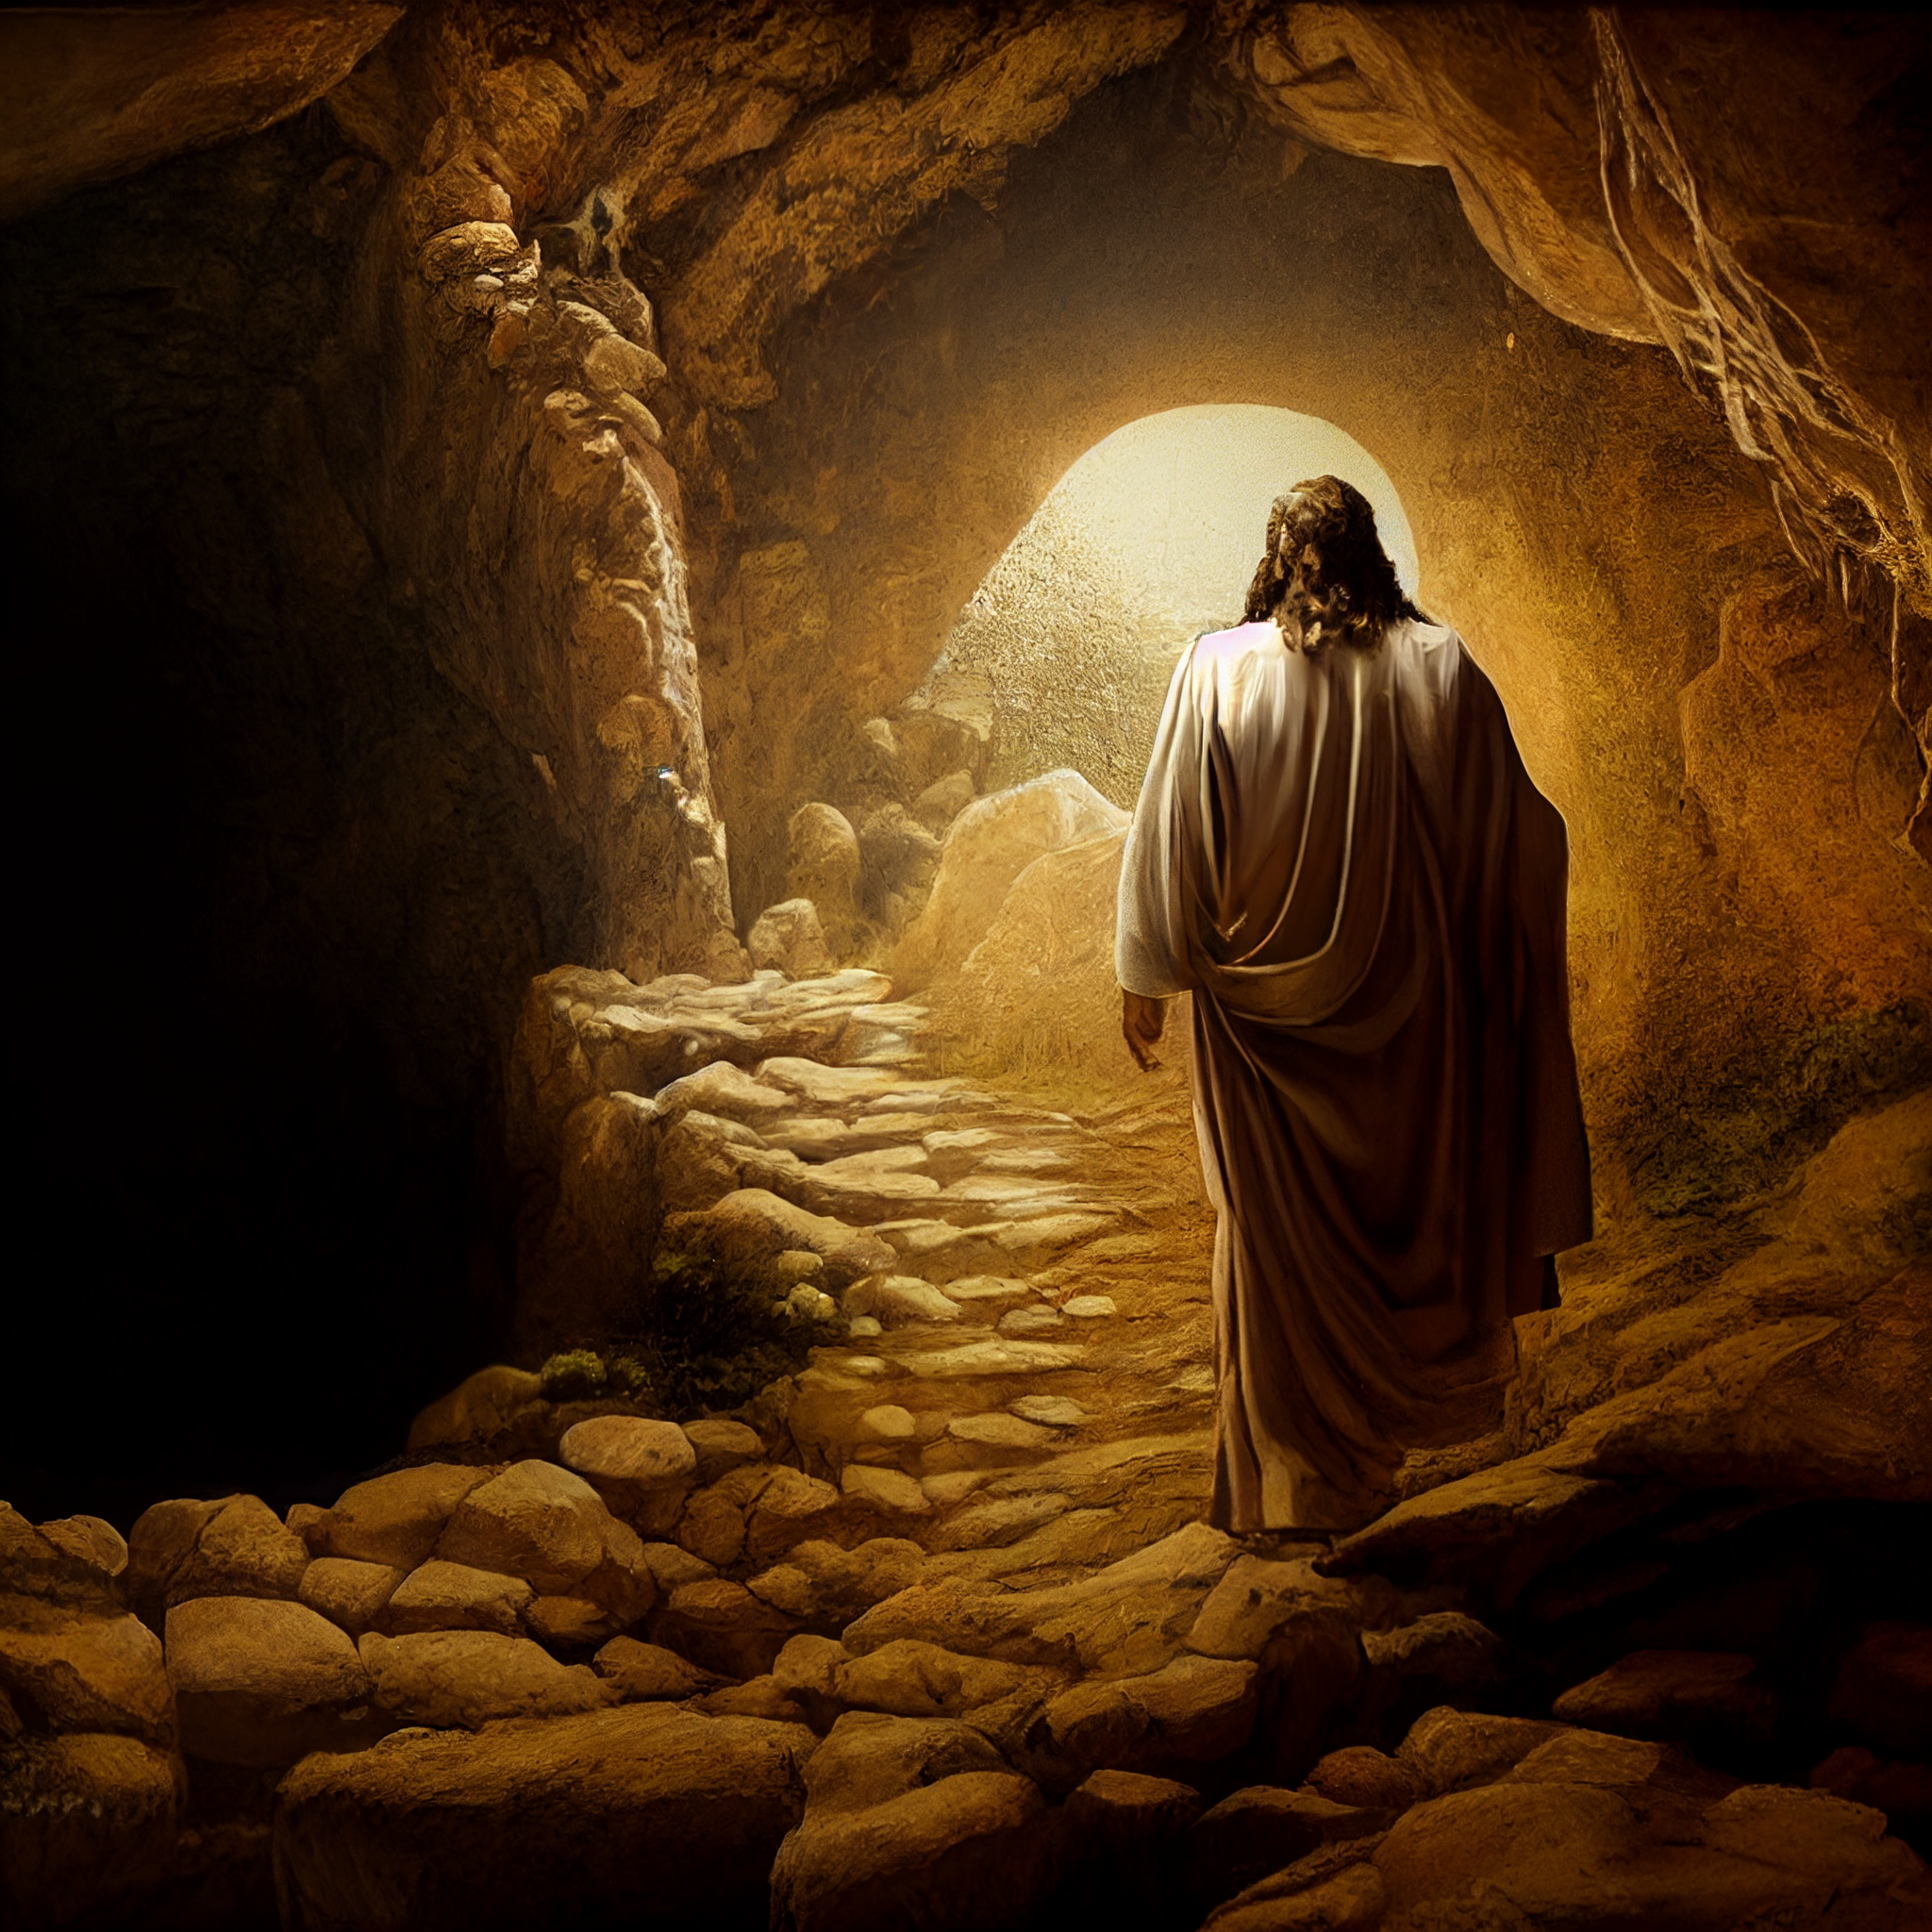 Jesus_walking_out_of_cave_as_father_GOD_highly